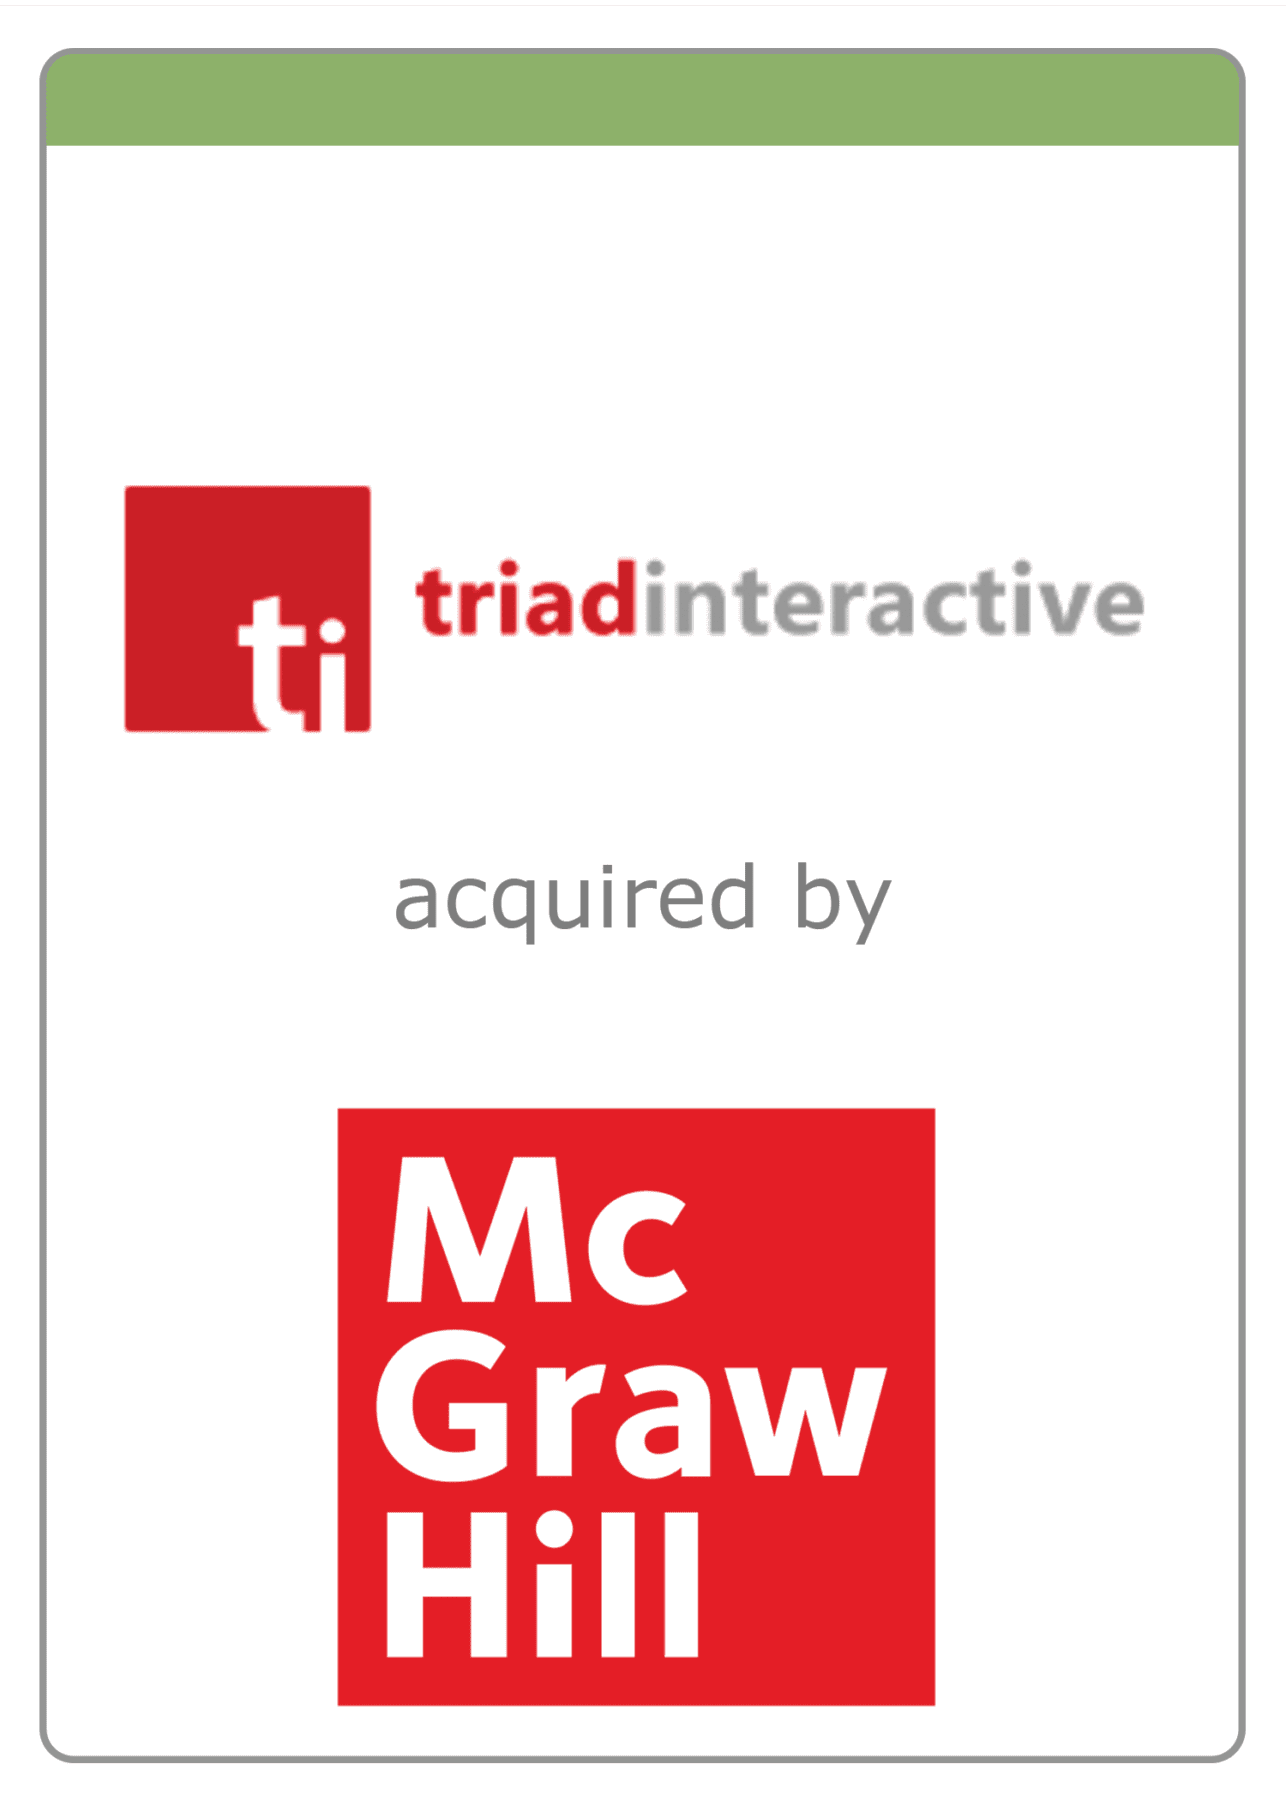 Triad Interactive acquired by McGraw Hill